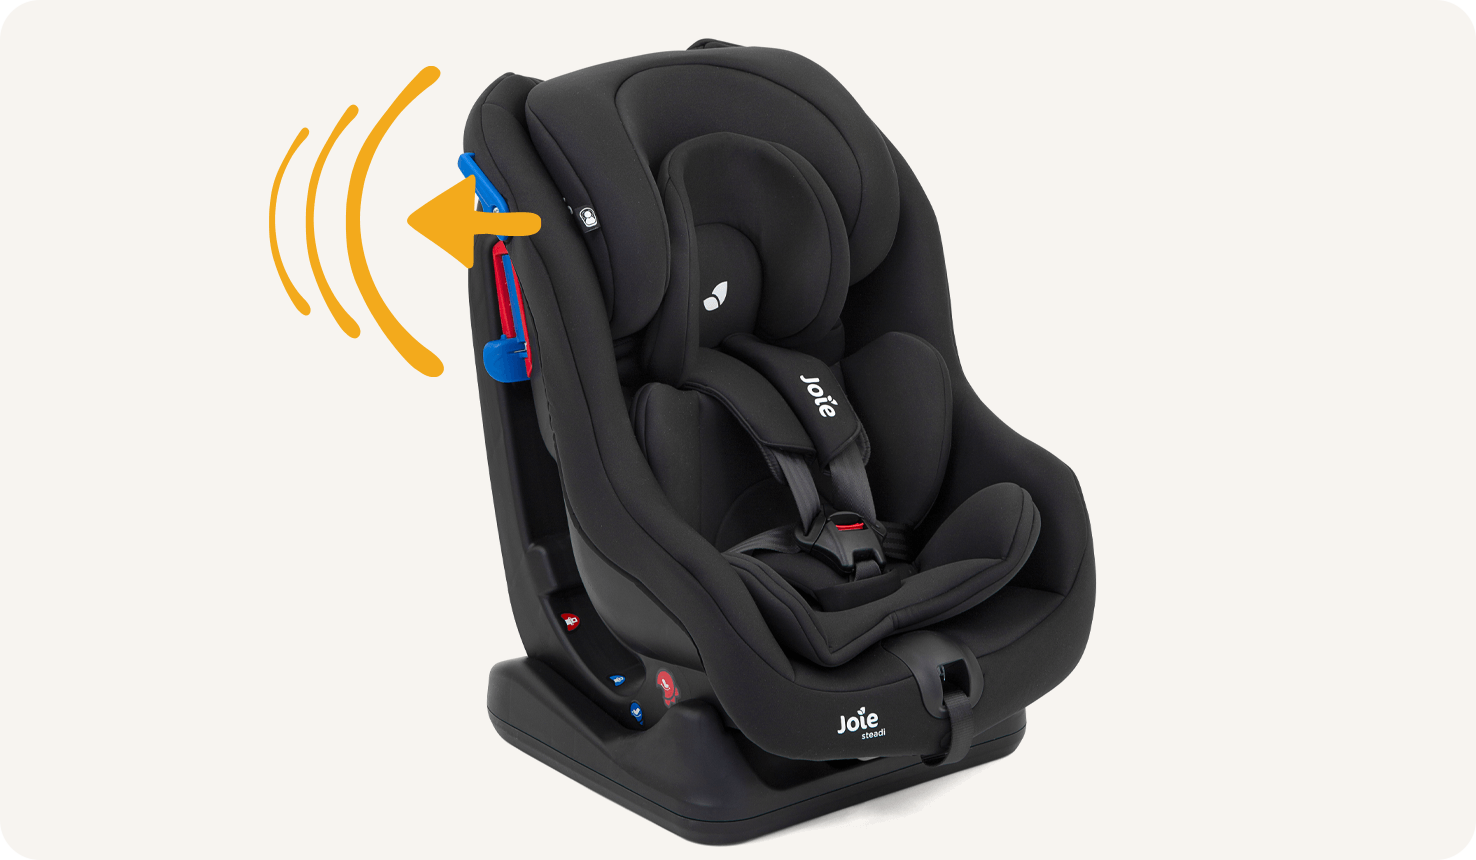 Joie Steadi car seat with harness clipped in with a black colour, at an angle facing to the right and arrow pointing outward at headrest with two lines.